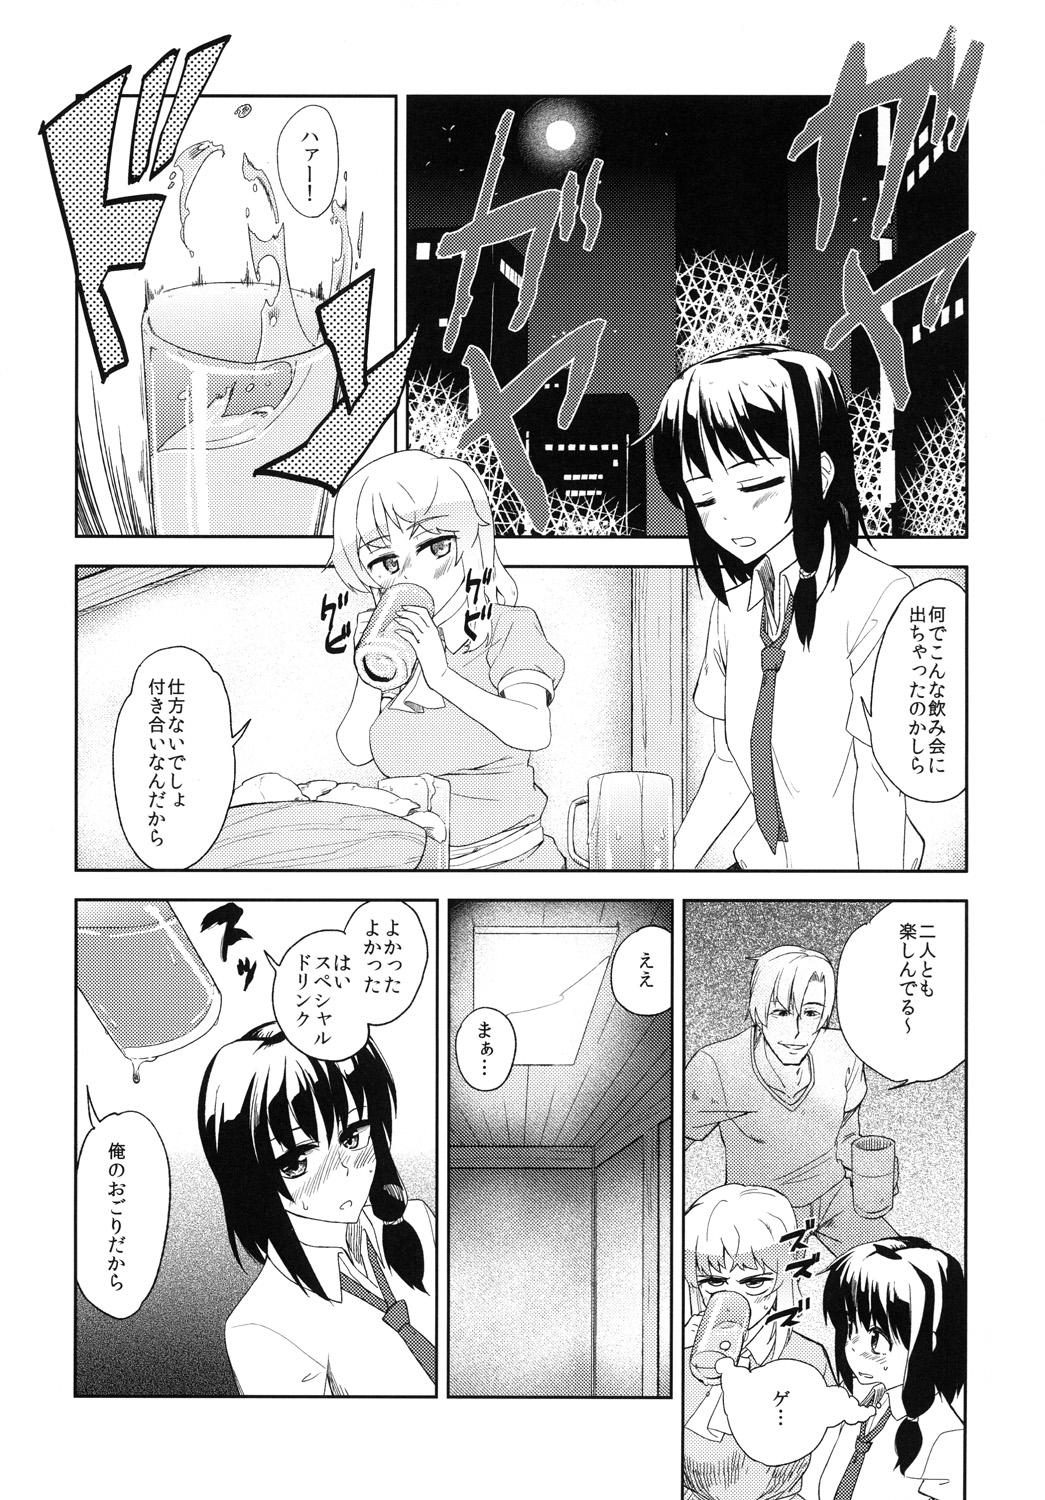 Oiled S-FREE - Touhou project Gaydudes - Page 4